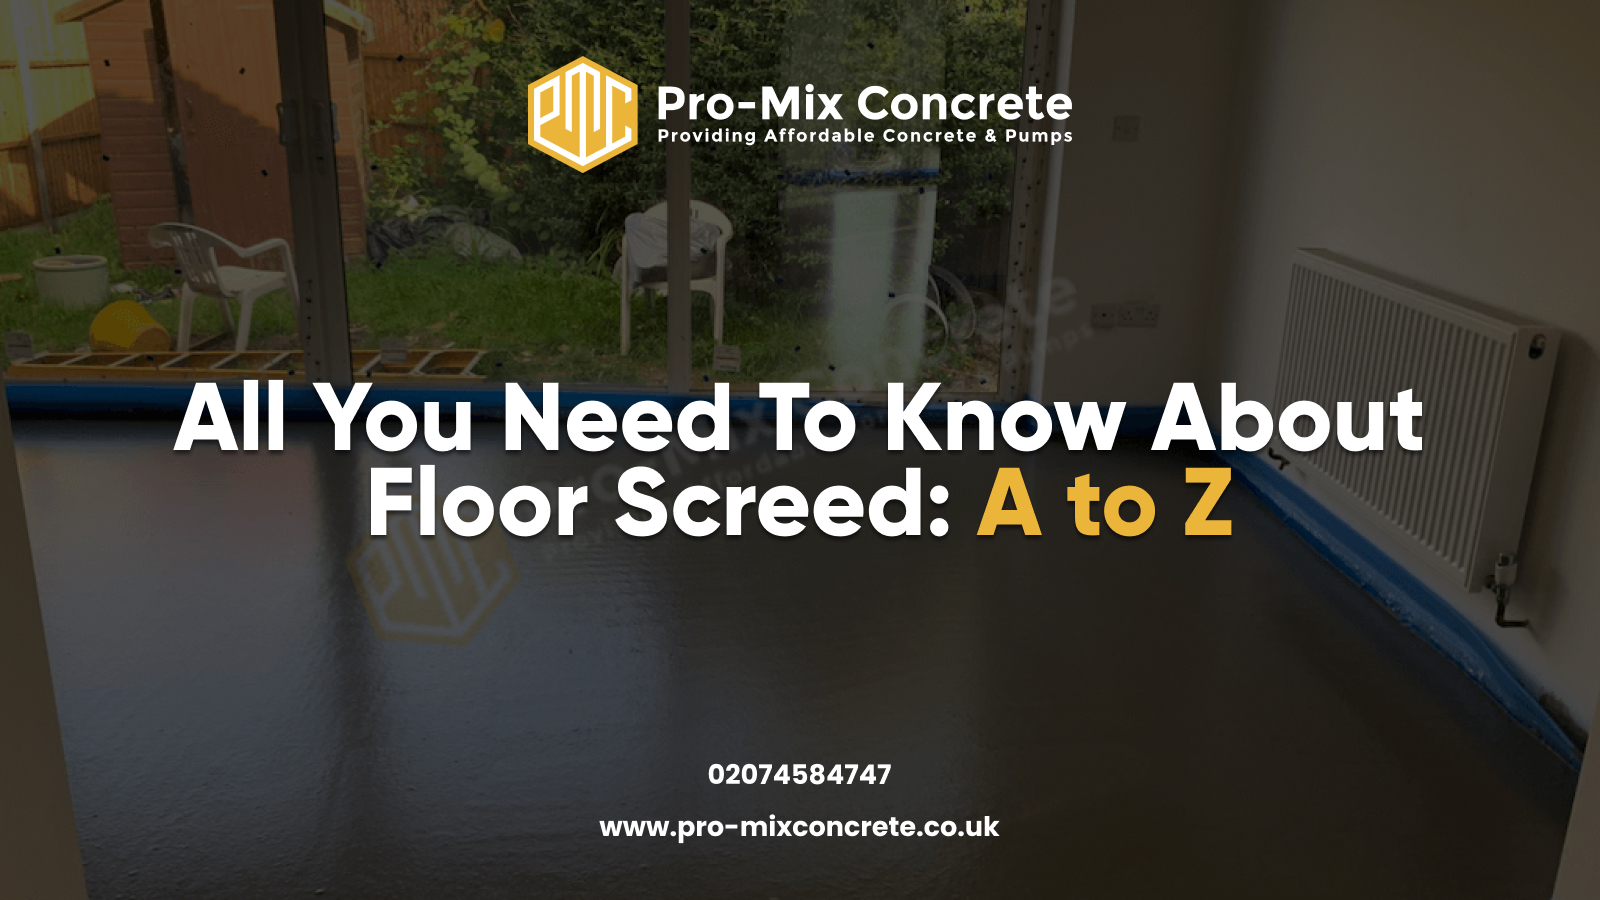 All You Need To Know About Floor Screed: A to Z